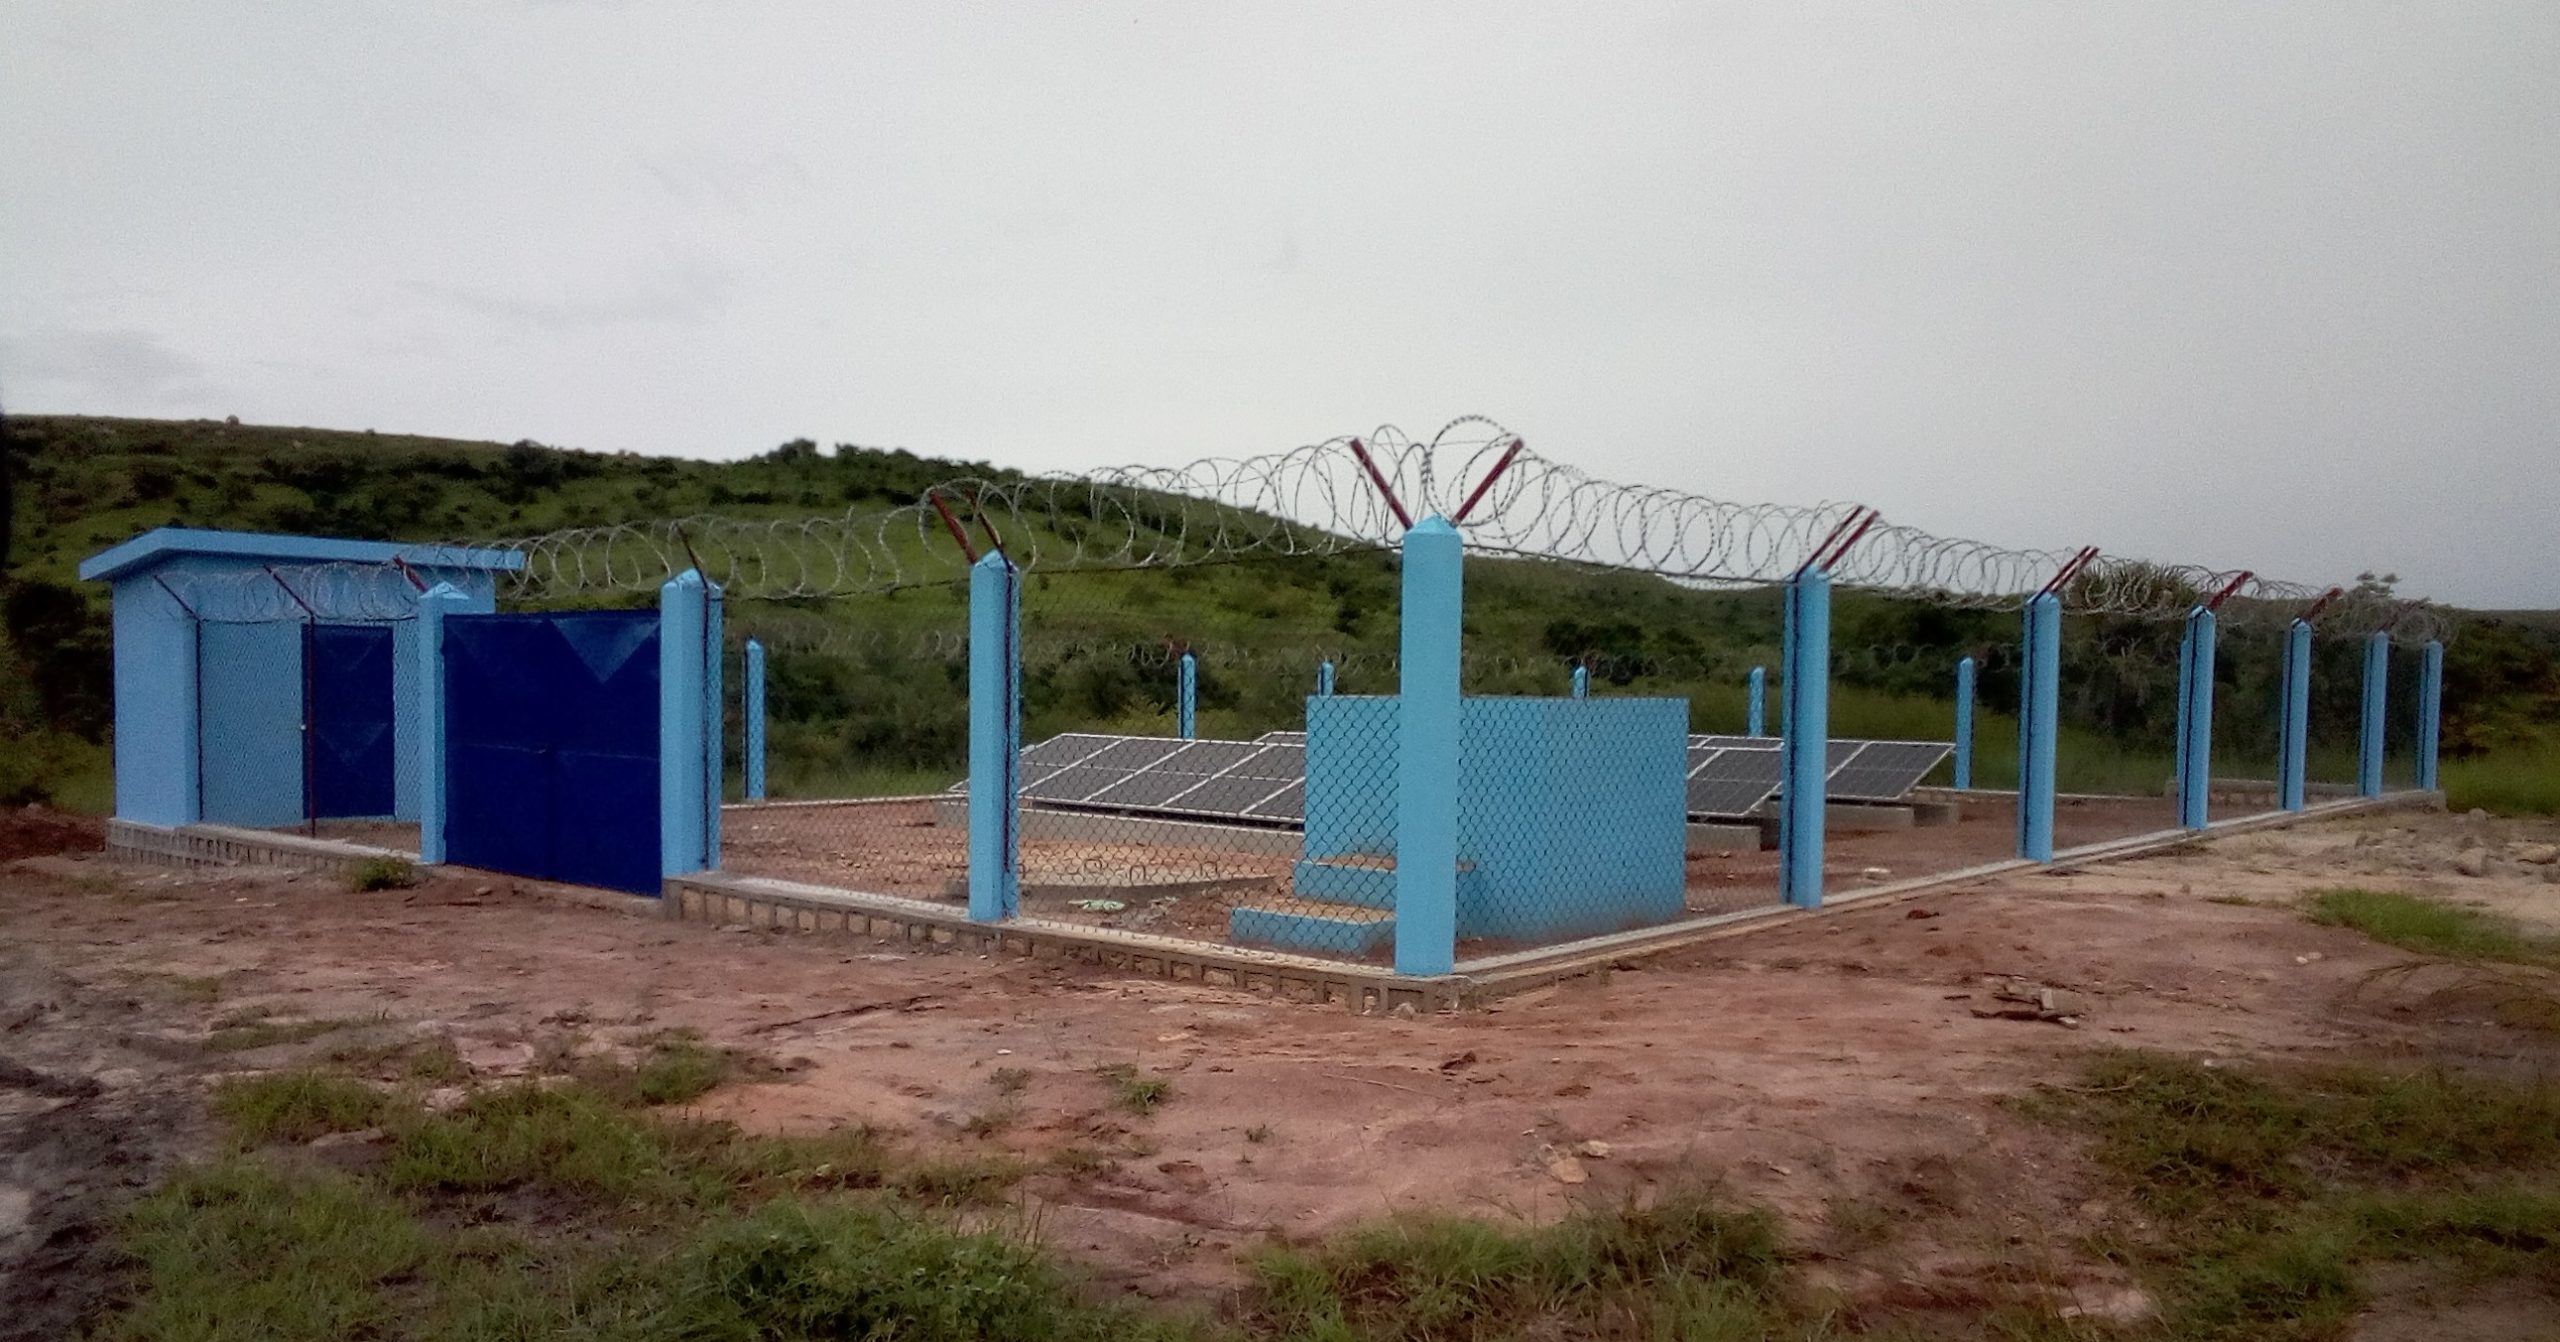 New construction of a water supply system